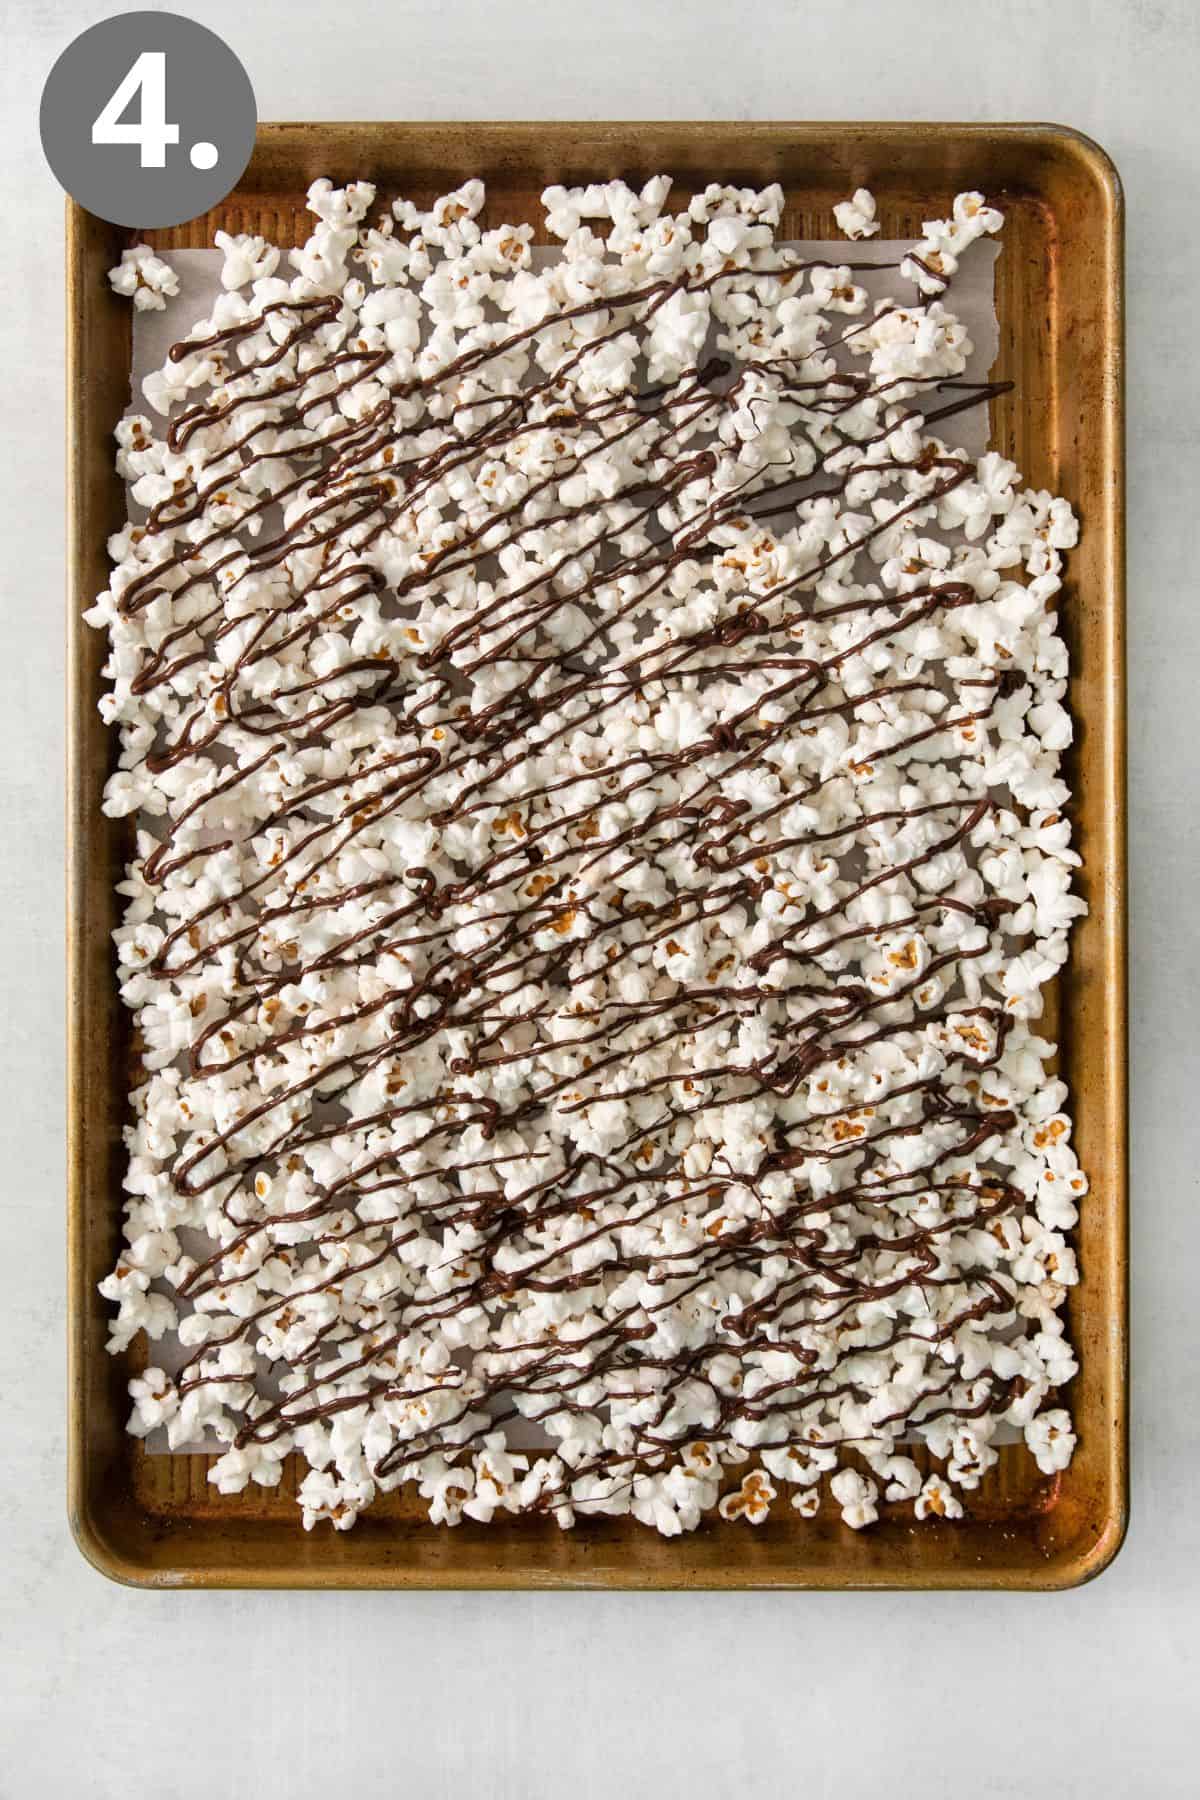 Popcorn drizzled with chocolate on a baking tray